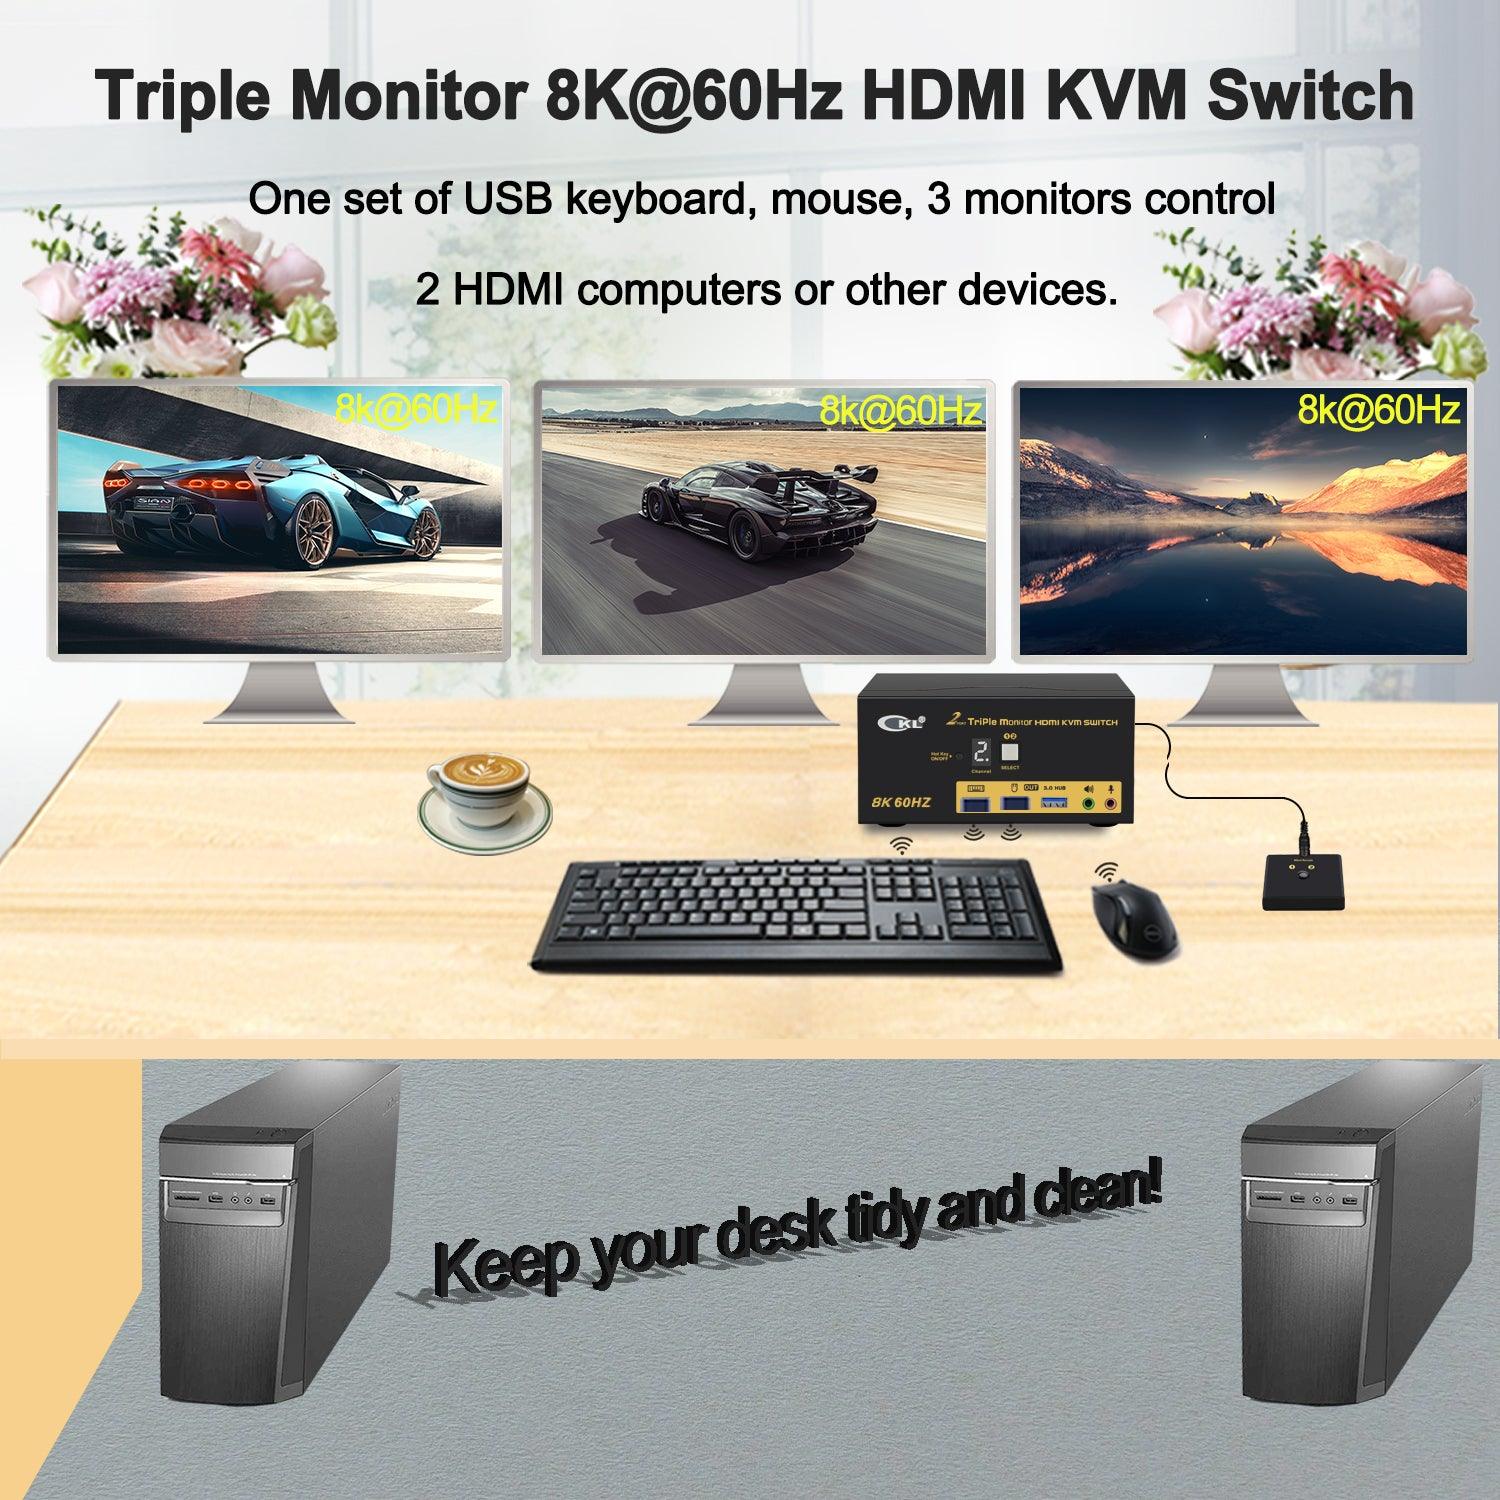 CKL 2 Port USB 3.0 KVM Switch Triple Monitor HDMI 2.1 8K 60Hz 4K 120Hz 144Hz with EDID, Keyboard Video Mouse Peripherals Switcher for 2 Computers 3 Monitors with Cables and Audio CKL-923HUA-5 - CKL KVM Switches